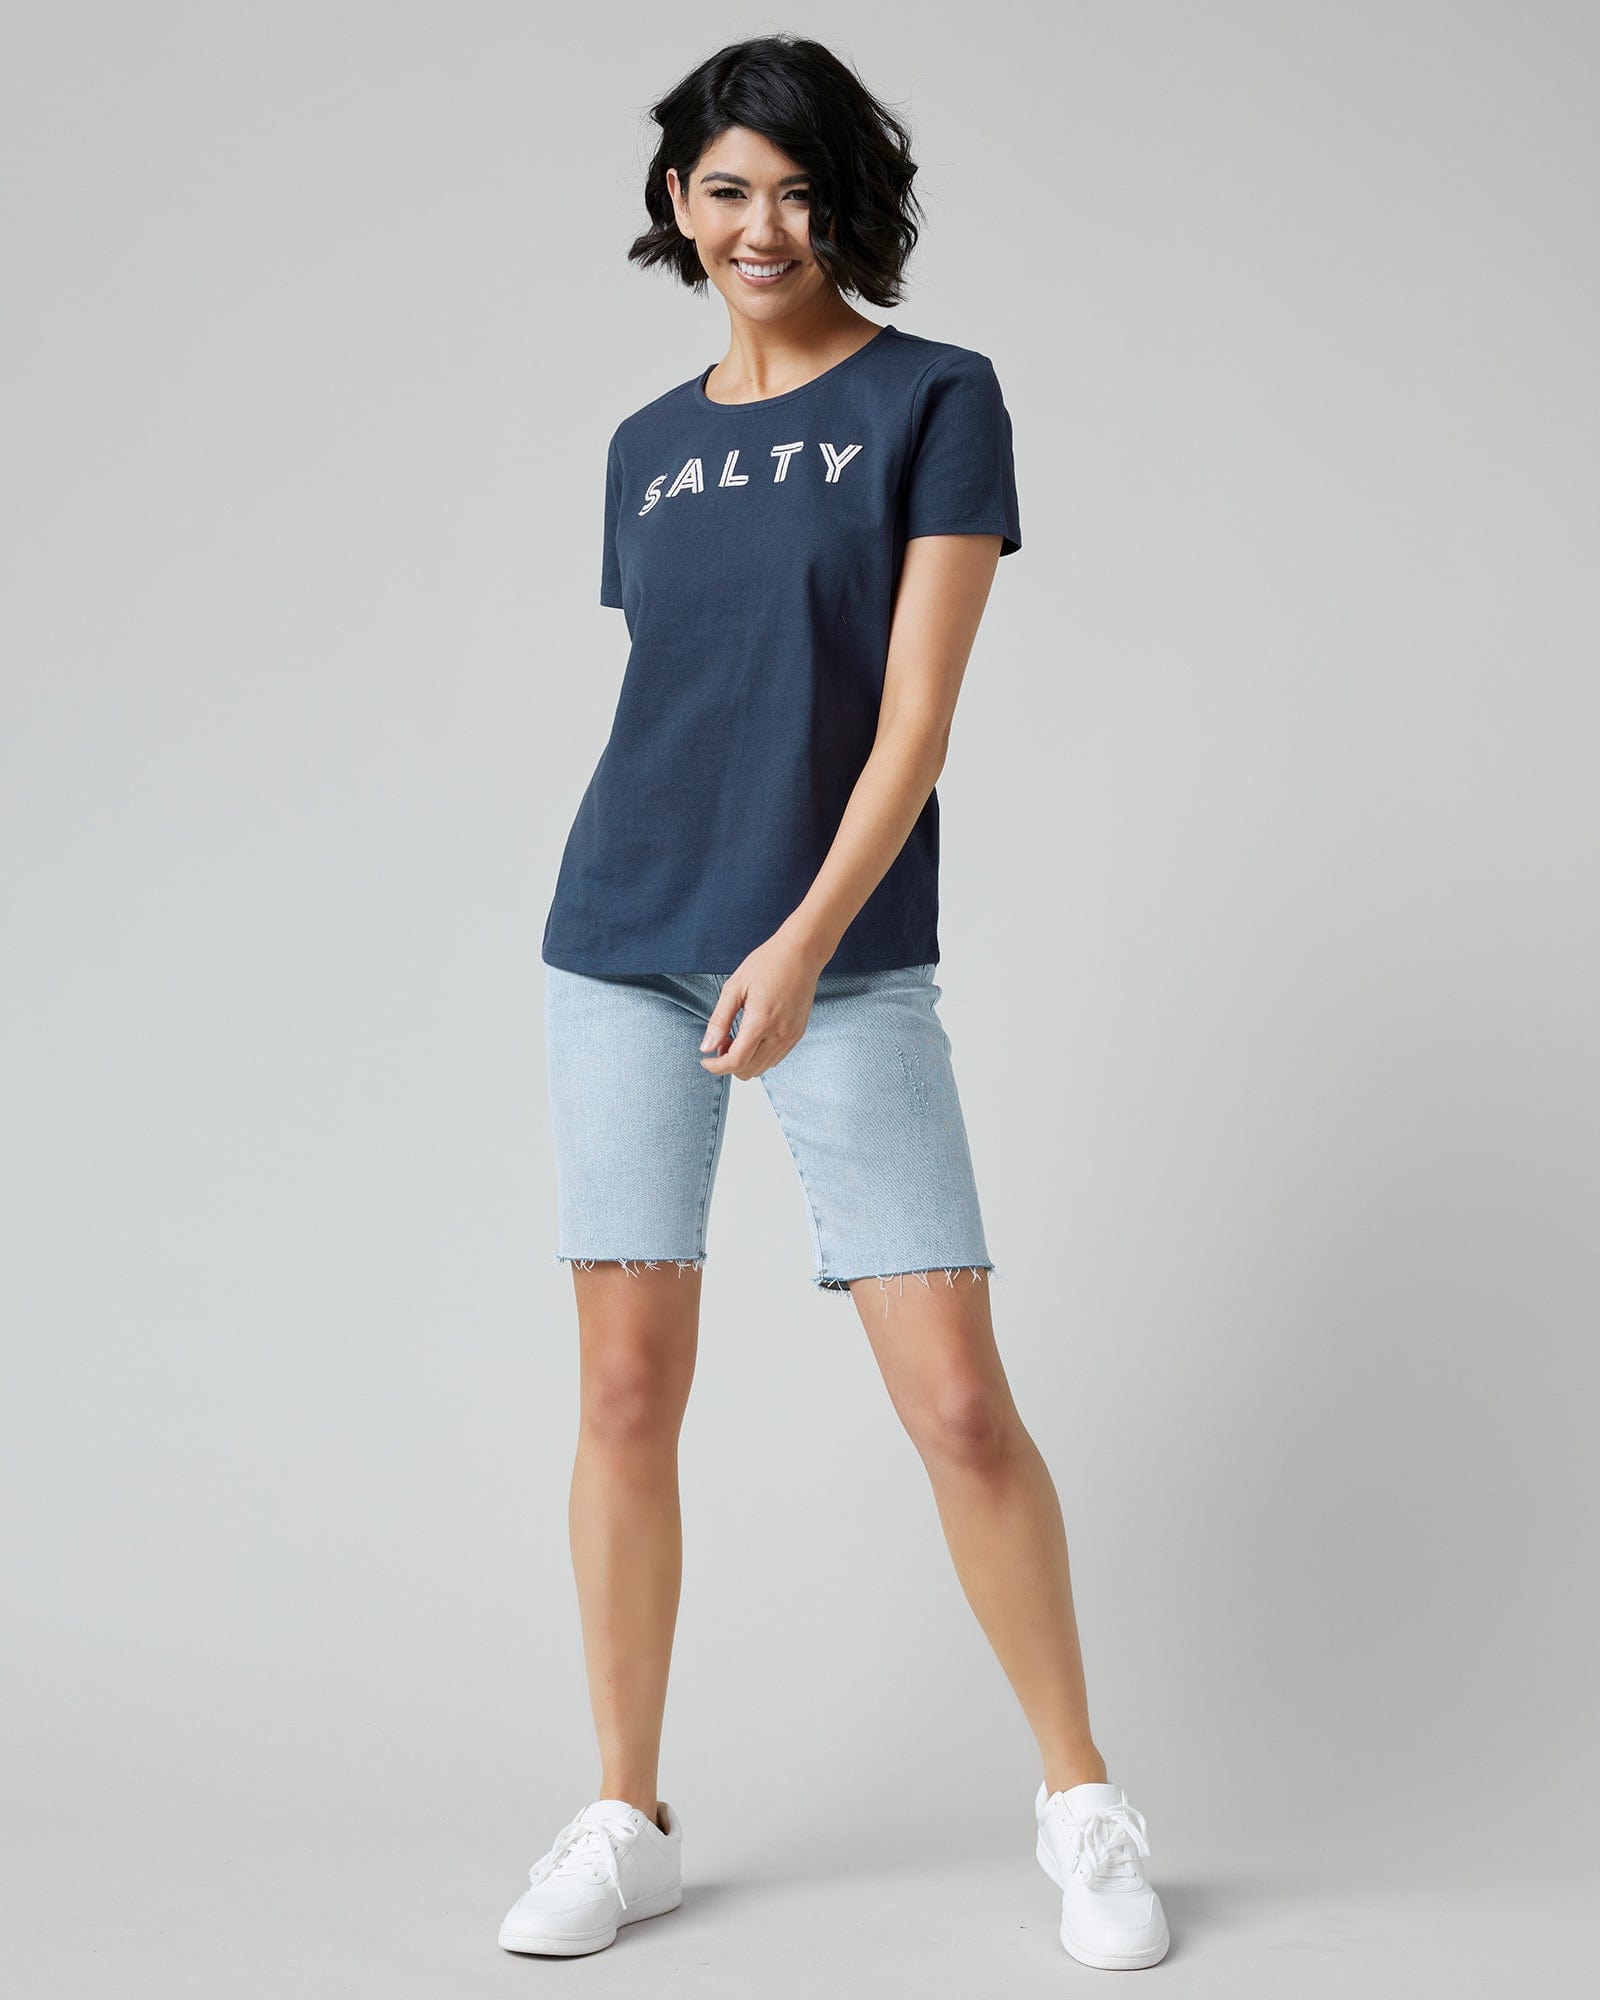 Woman in a navy graphic t-shirt with "SALTY" across the front